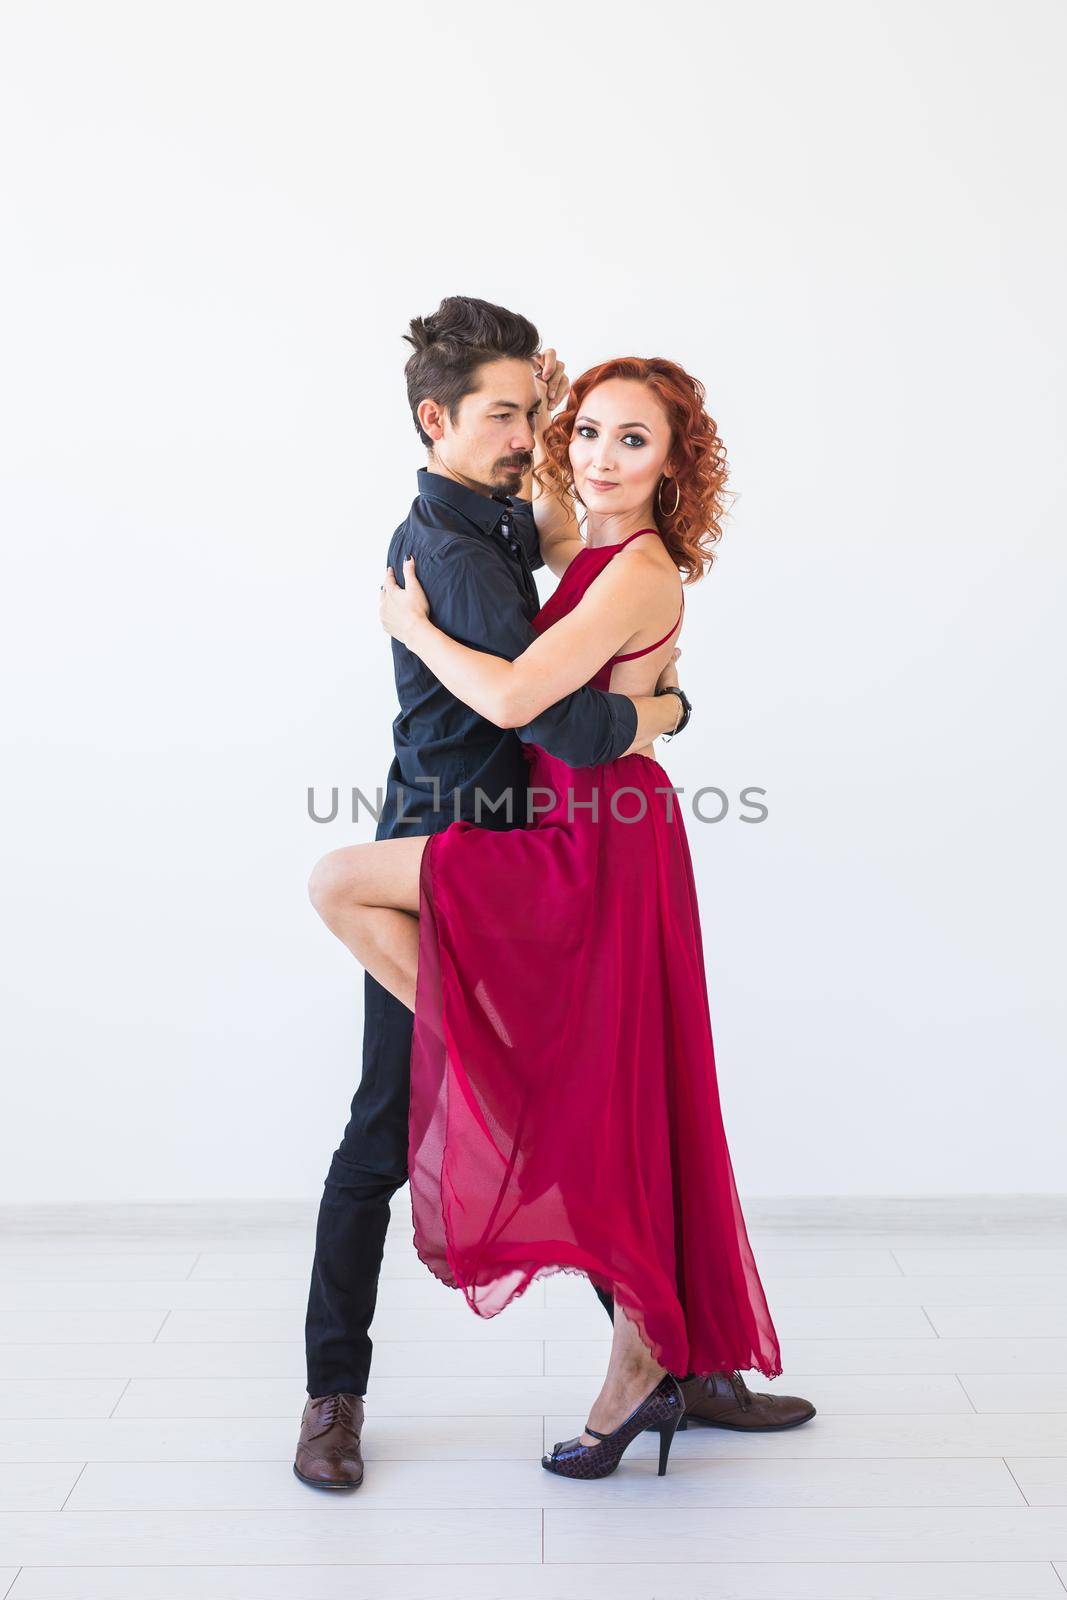 Social dance, bachata, kizomba, salsa, tango concept - Woman dressed in red dress and man in a black costume over white background by Satura86